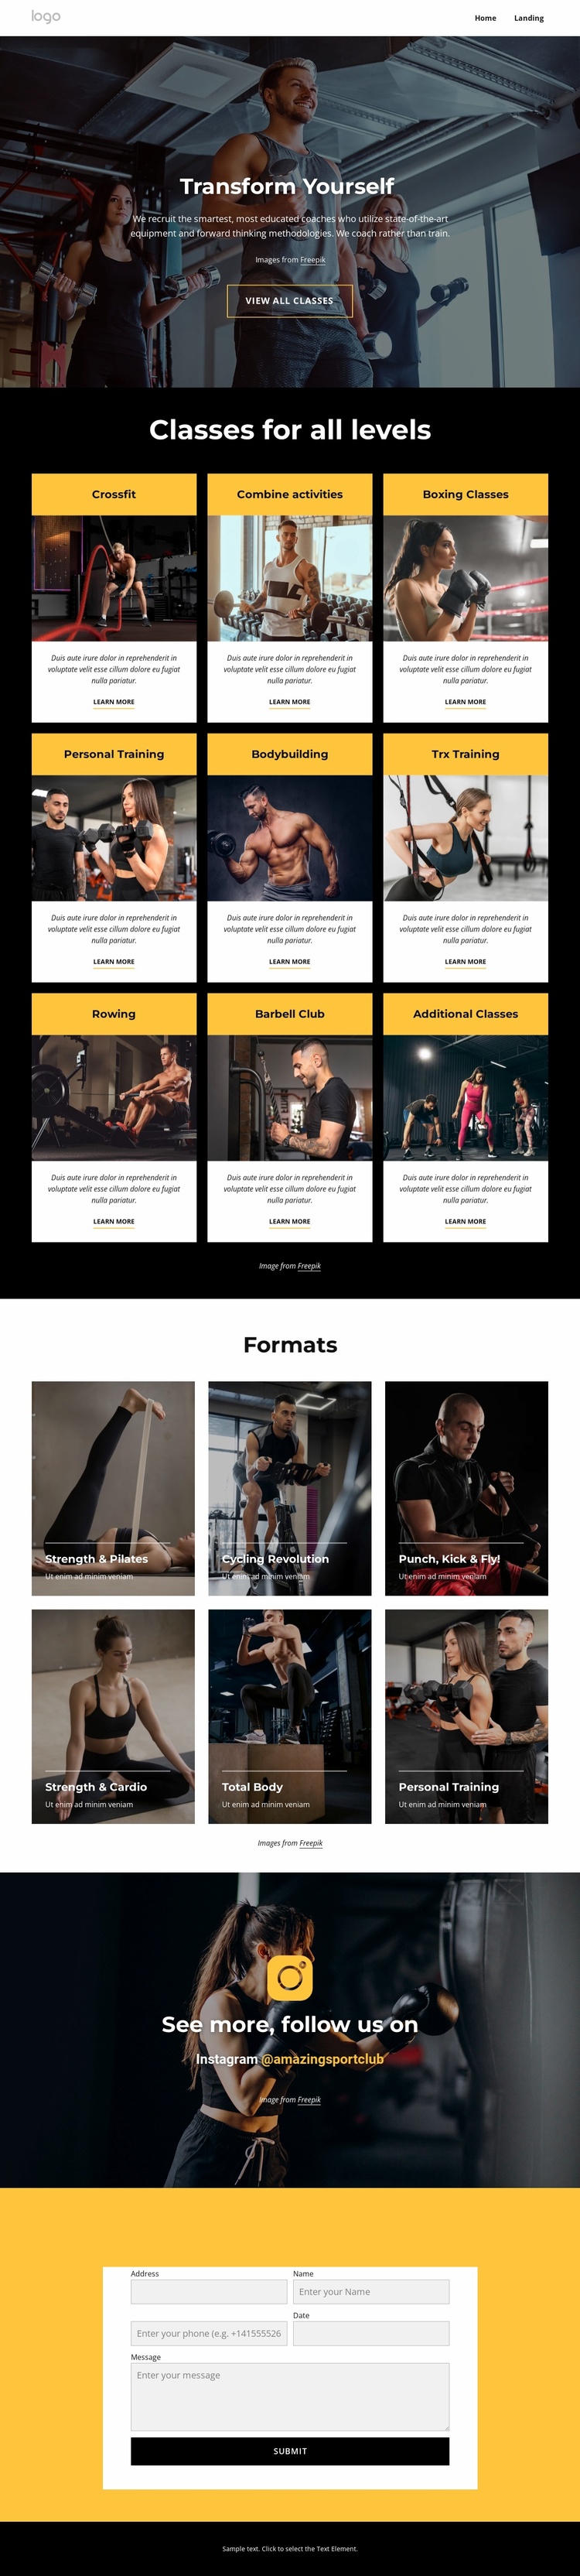 Fitness classes, indoor pools eCommerce Template